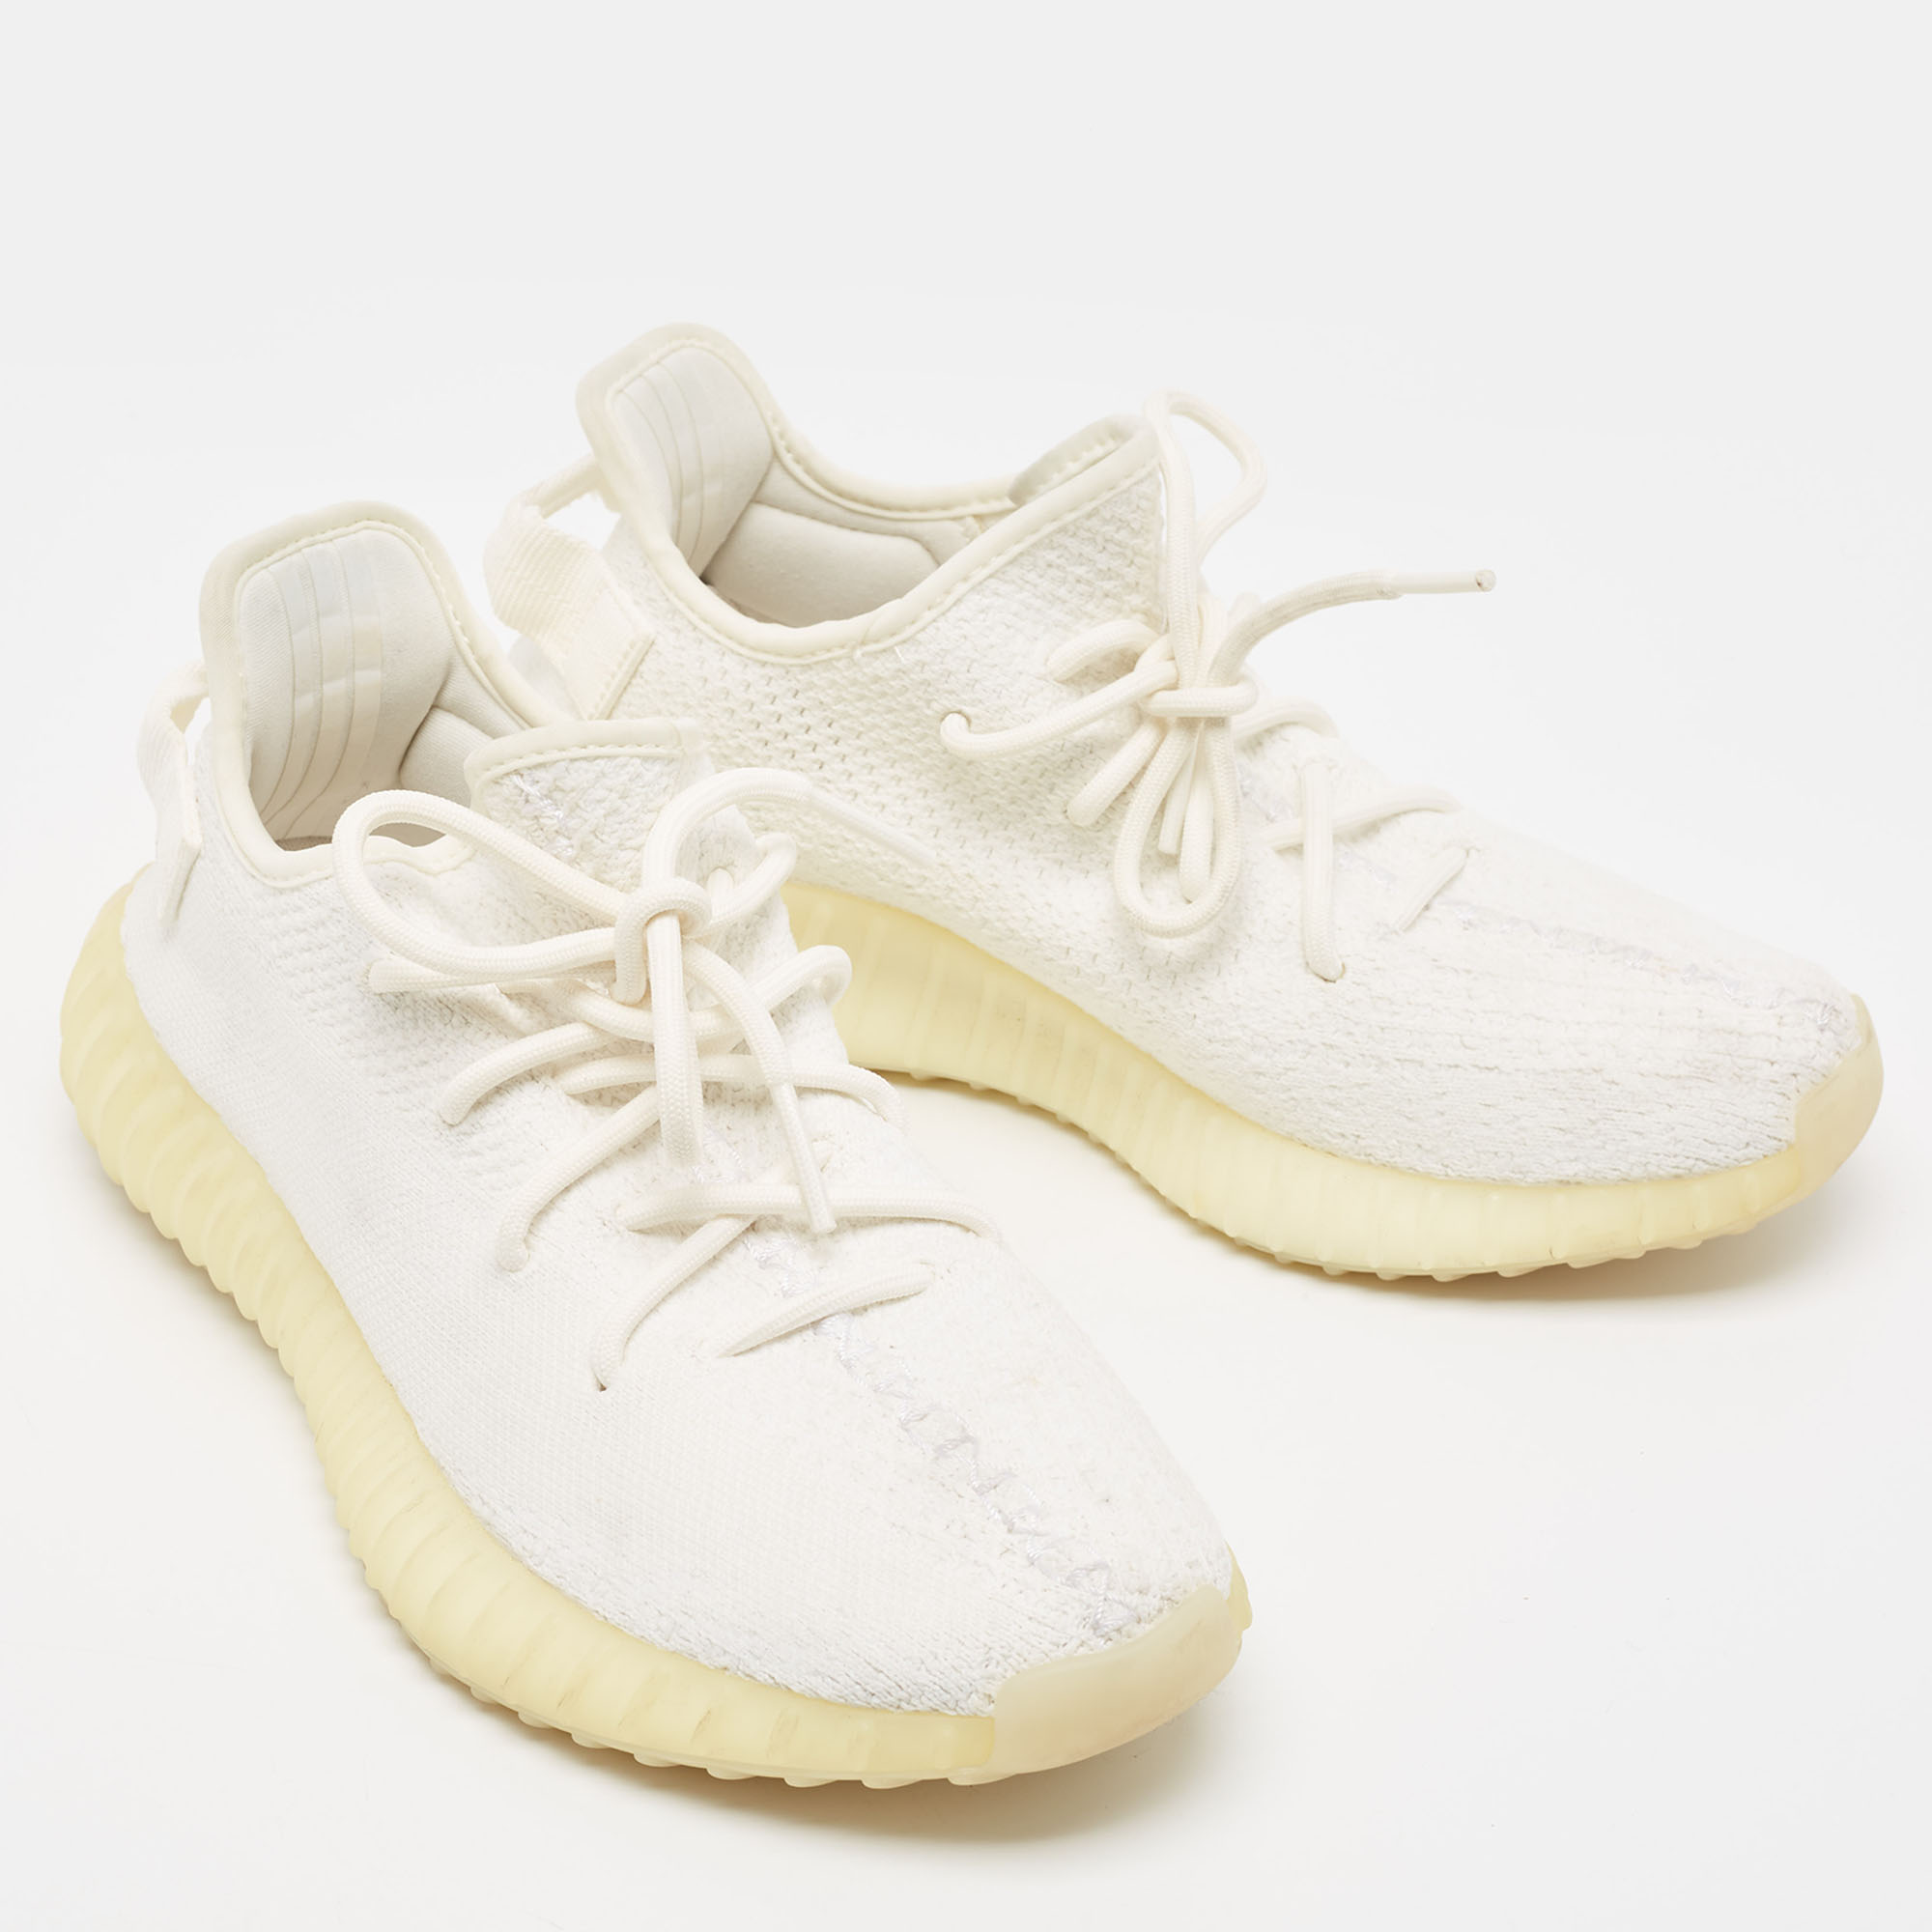 Yeezy X Adidas White Knit Fabric Boost 350 V2 Cream White Sneakers Size 40 2/3